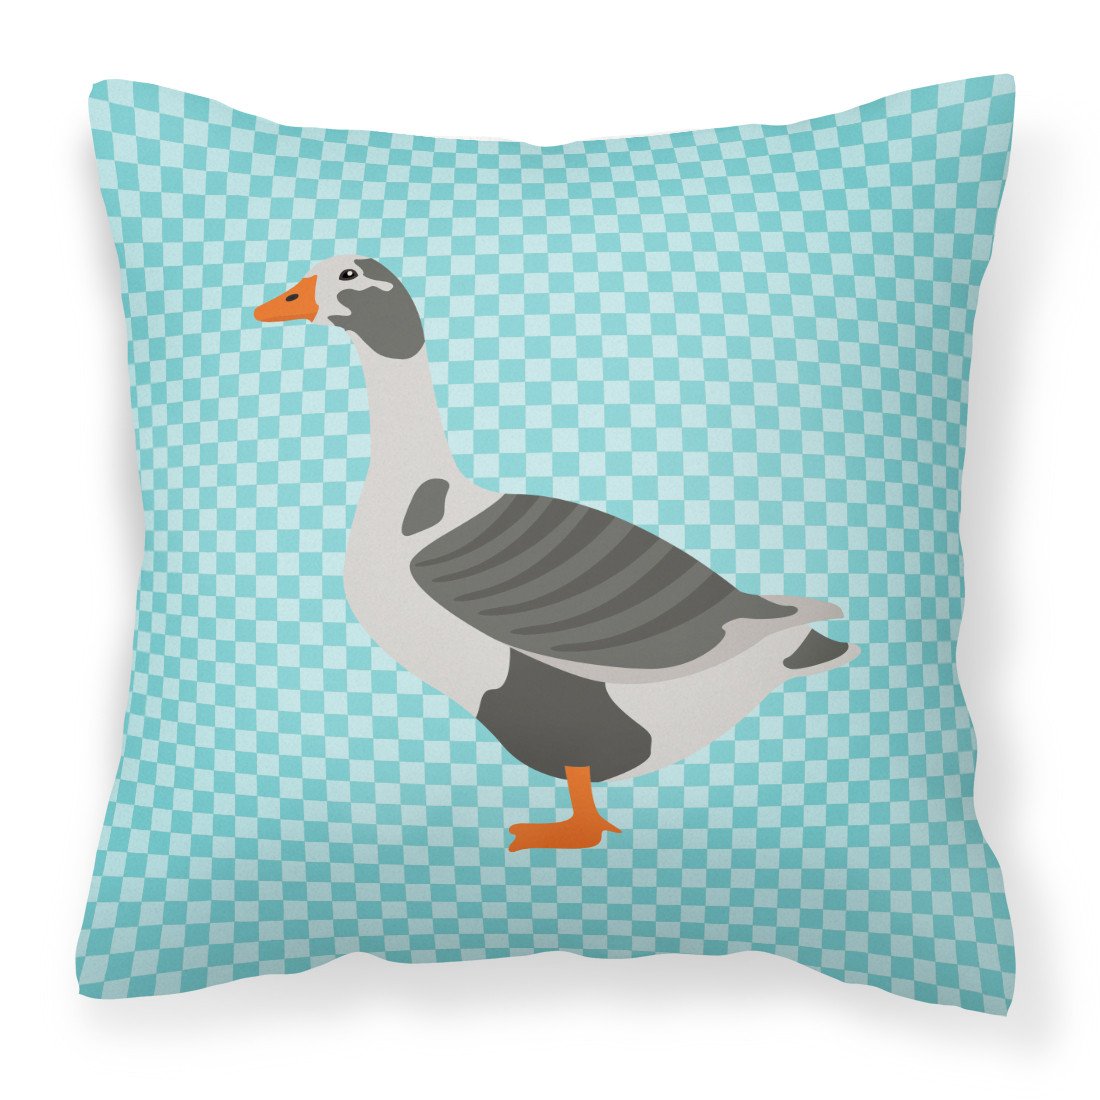 West of England Goose Blue Check Fabric Decorative Pillow BB8069PW1818 by Caroline's Treasures